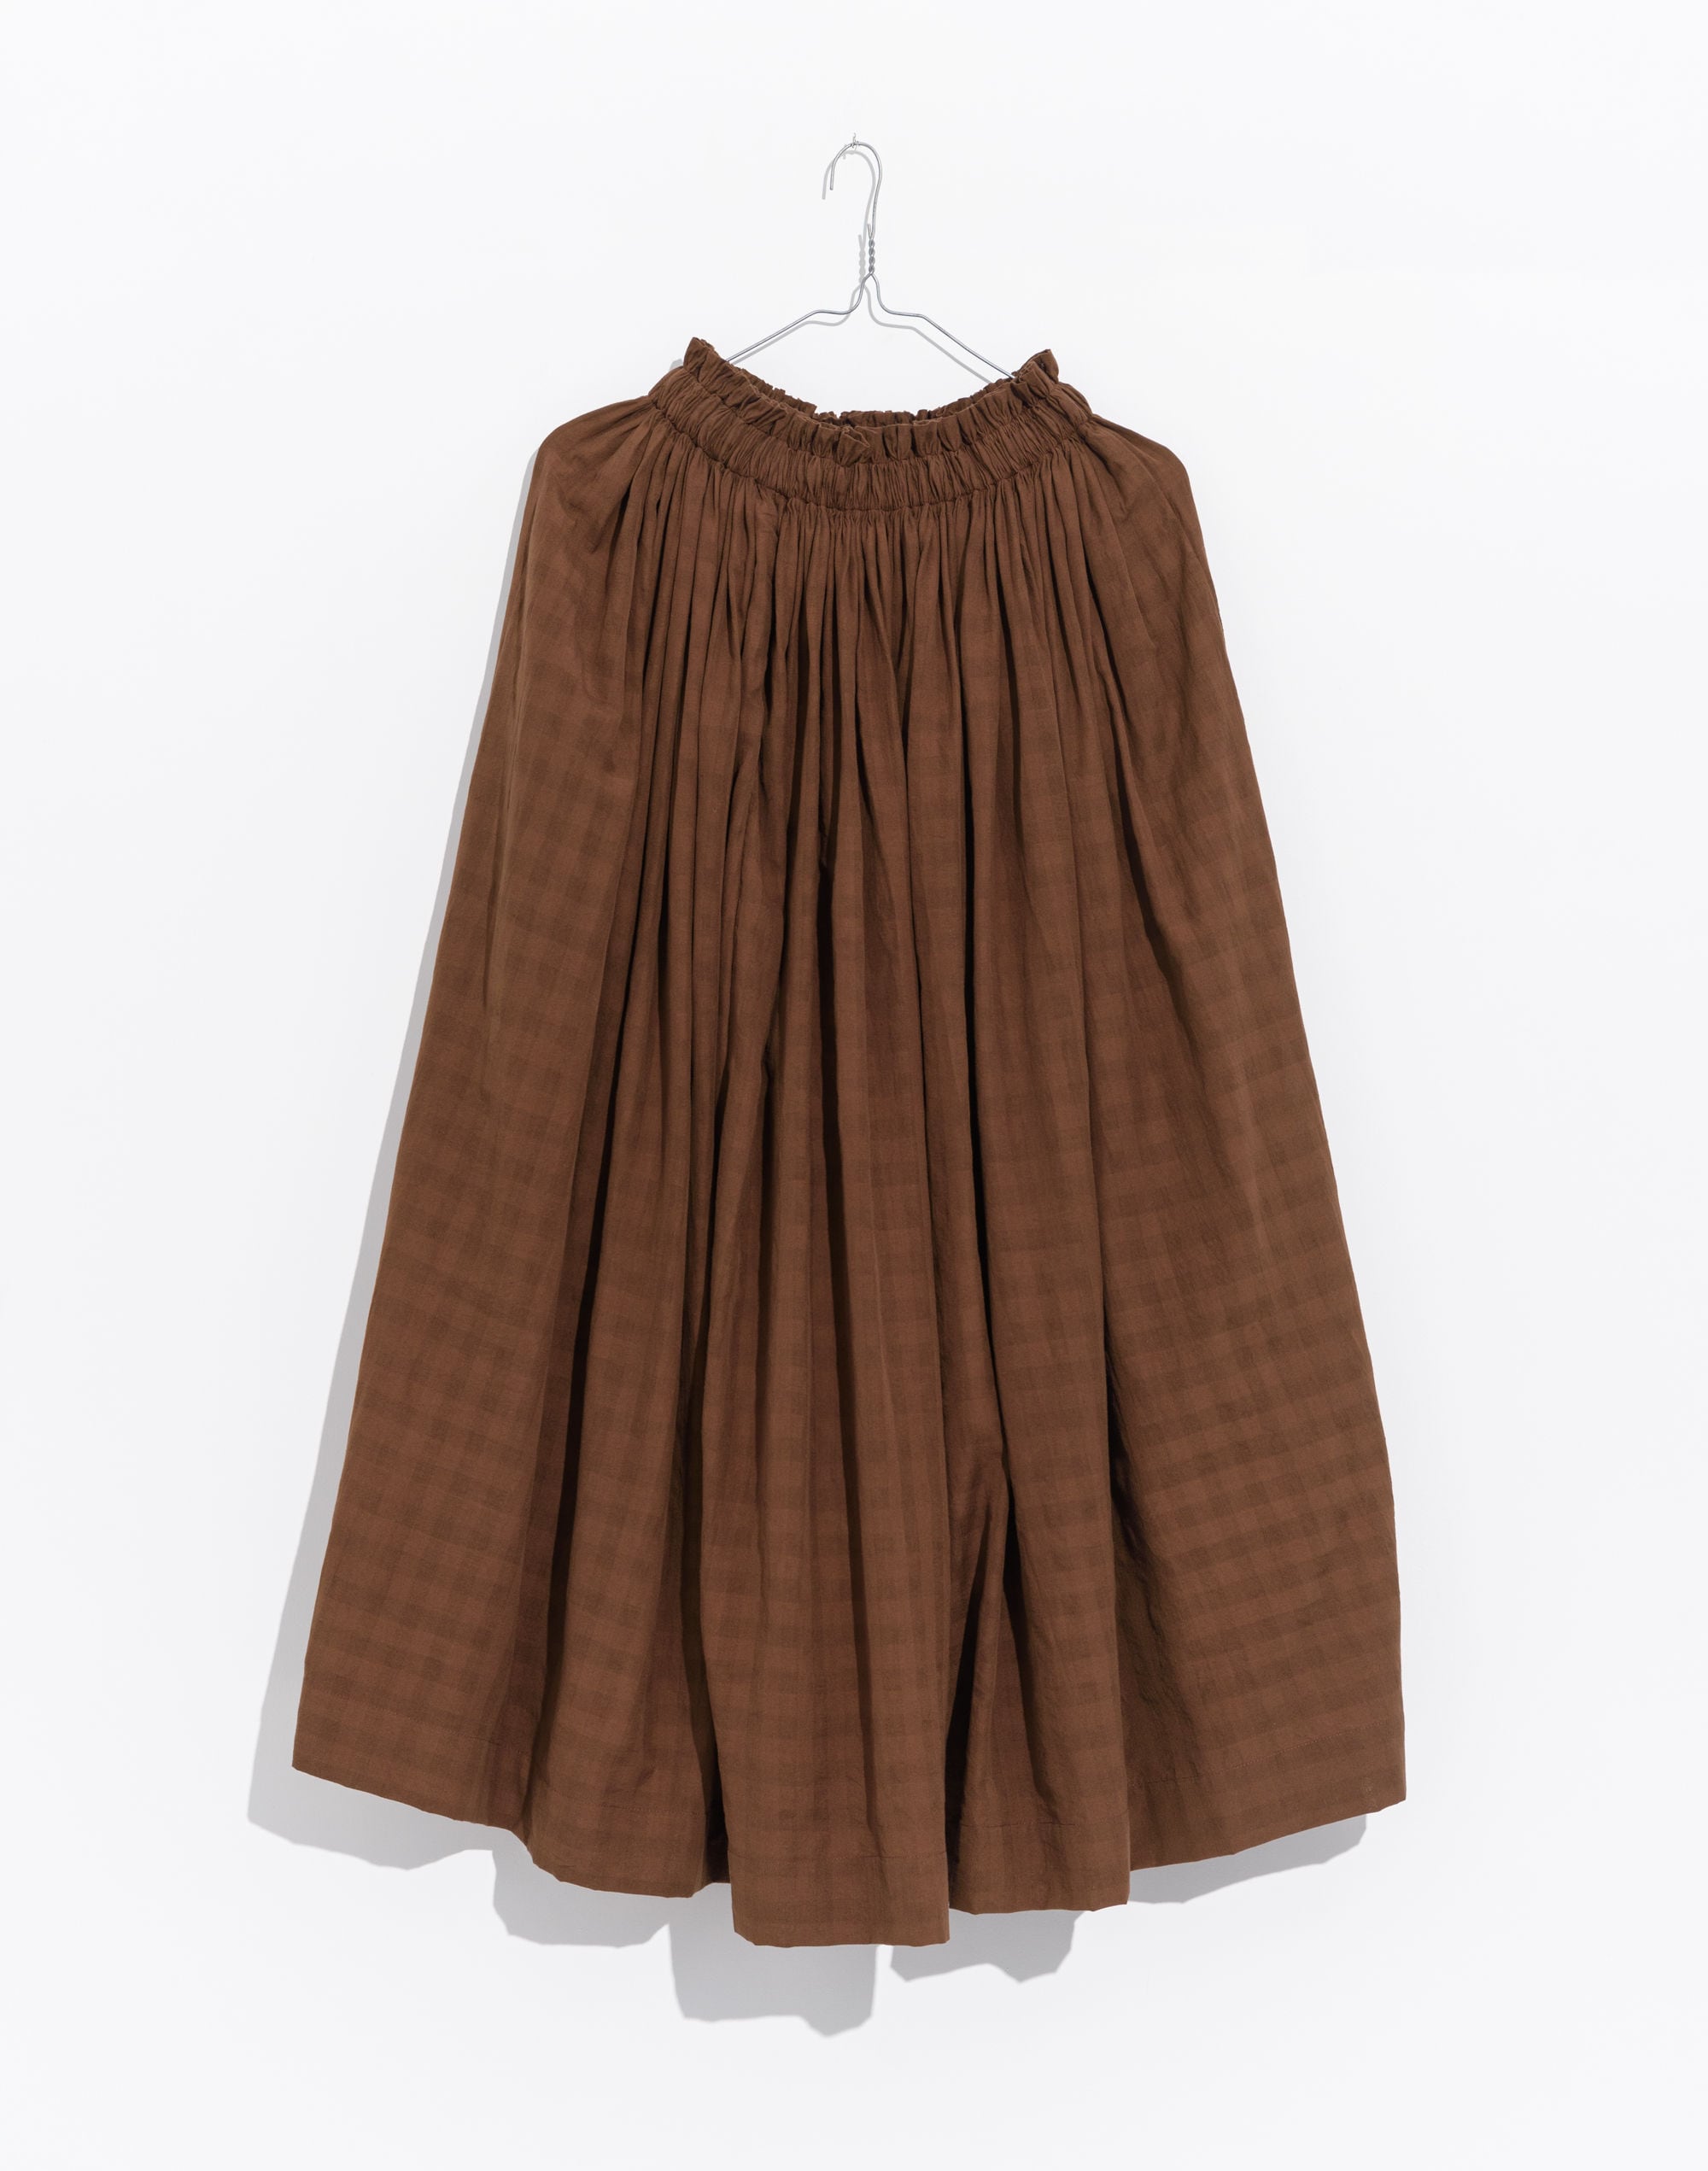 World of Crow Antique brown pull-on skirt